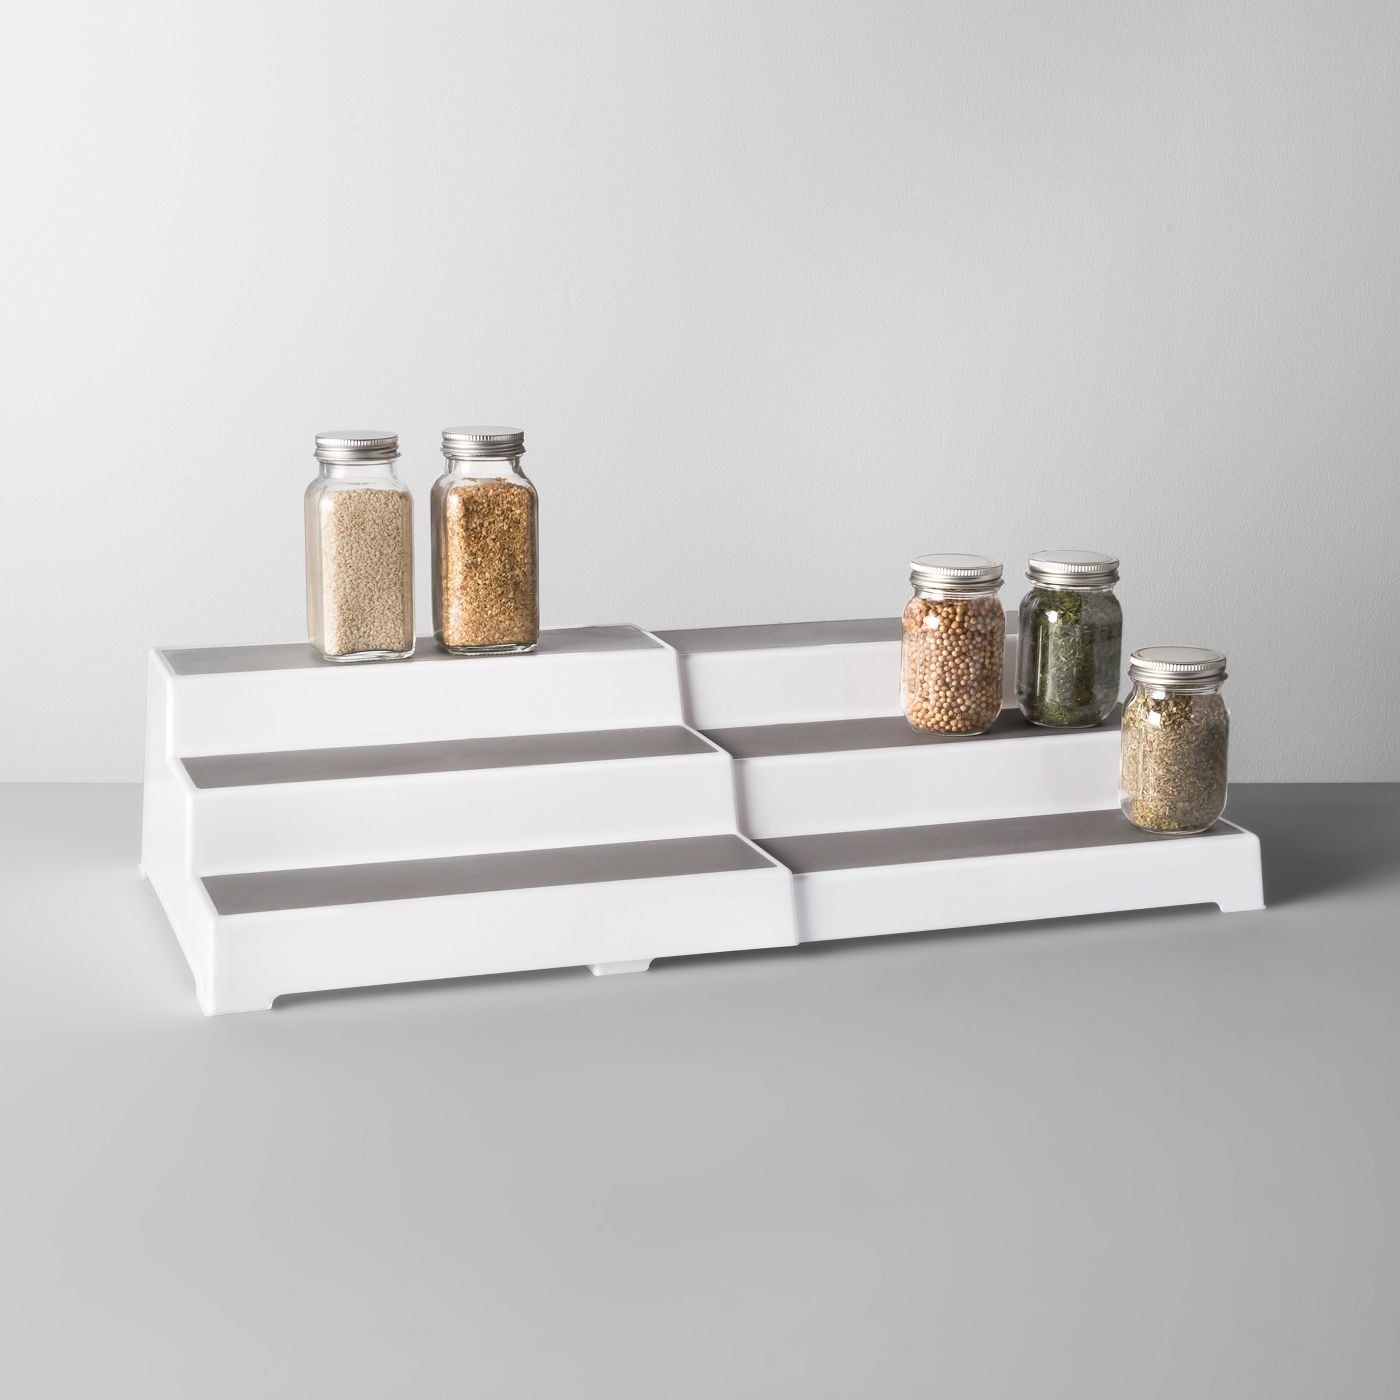 An image of a three-tier expandable shelf